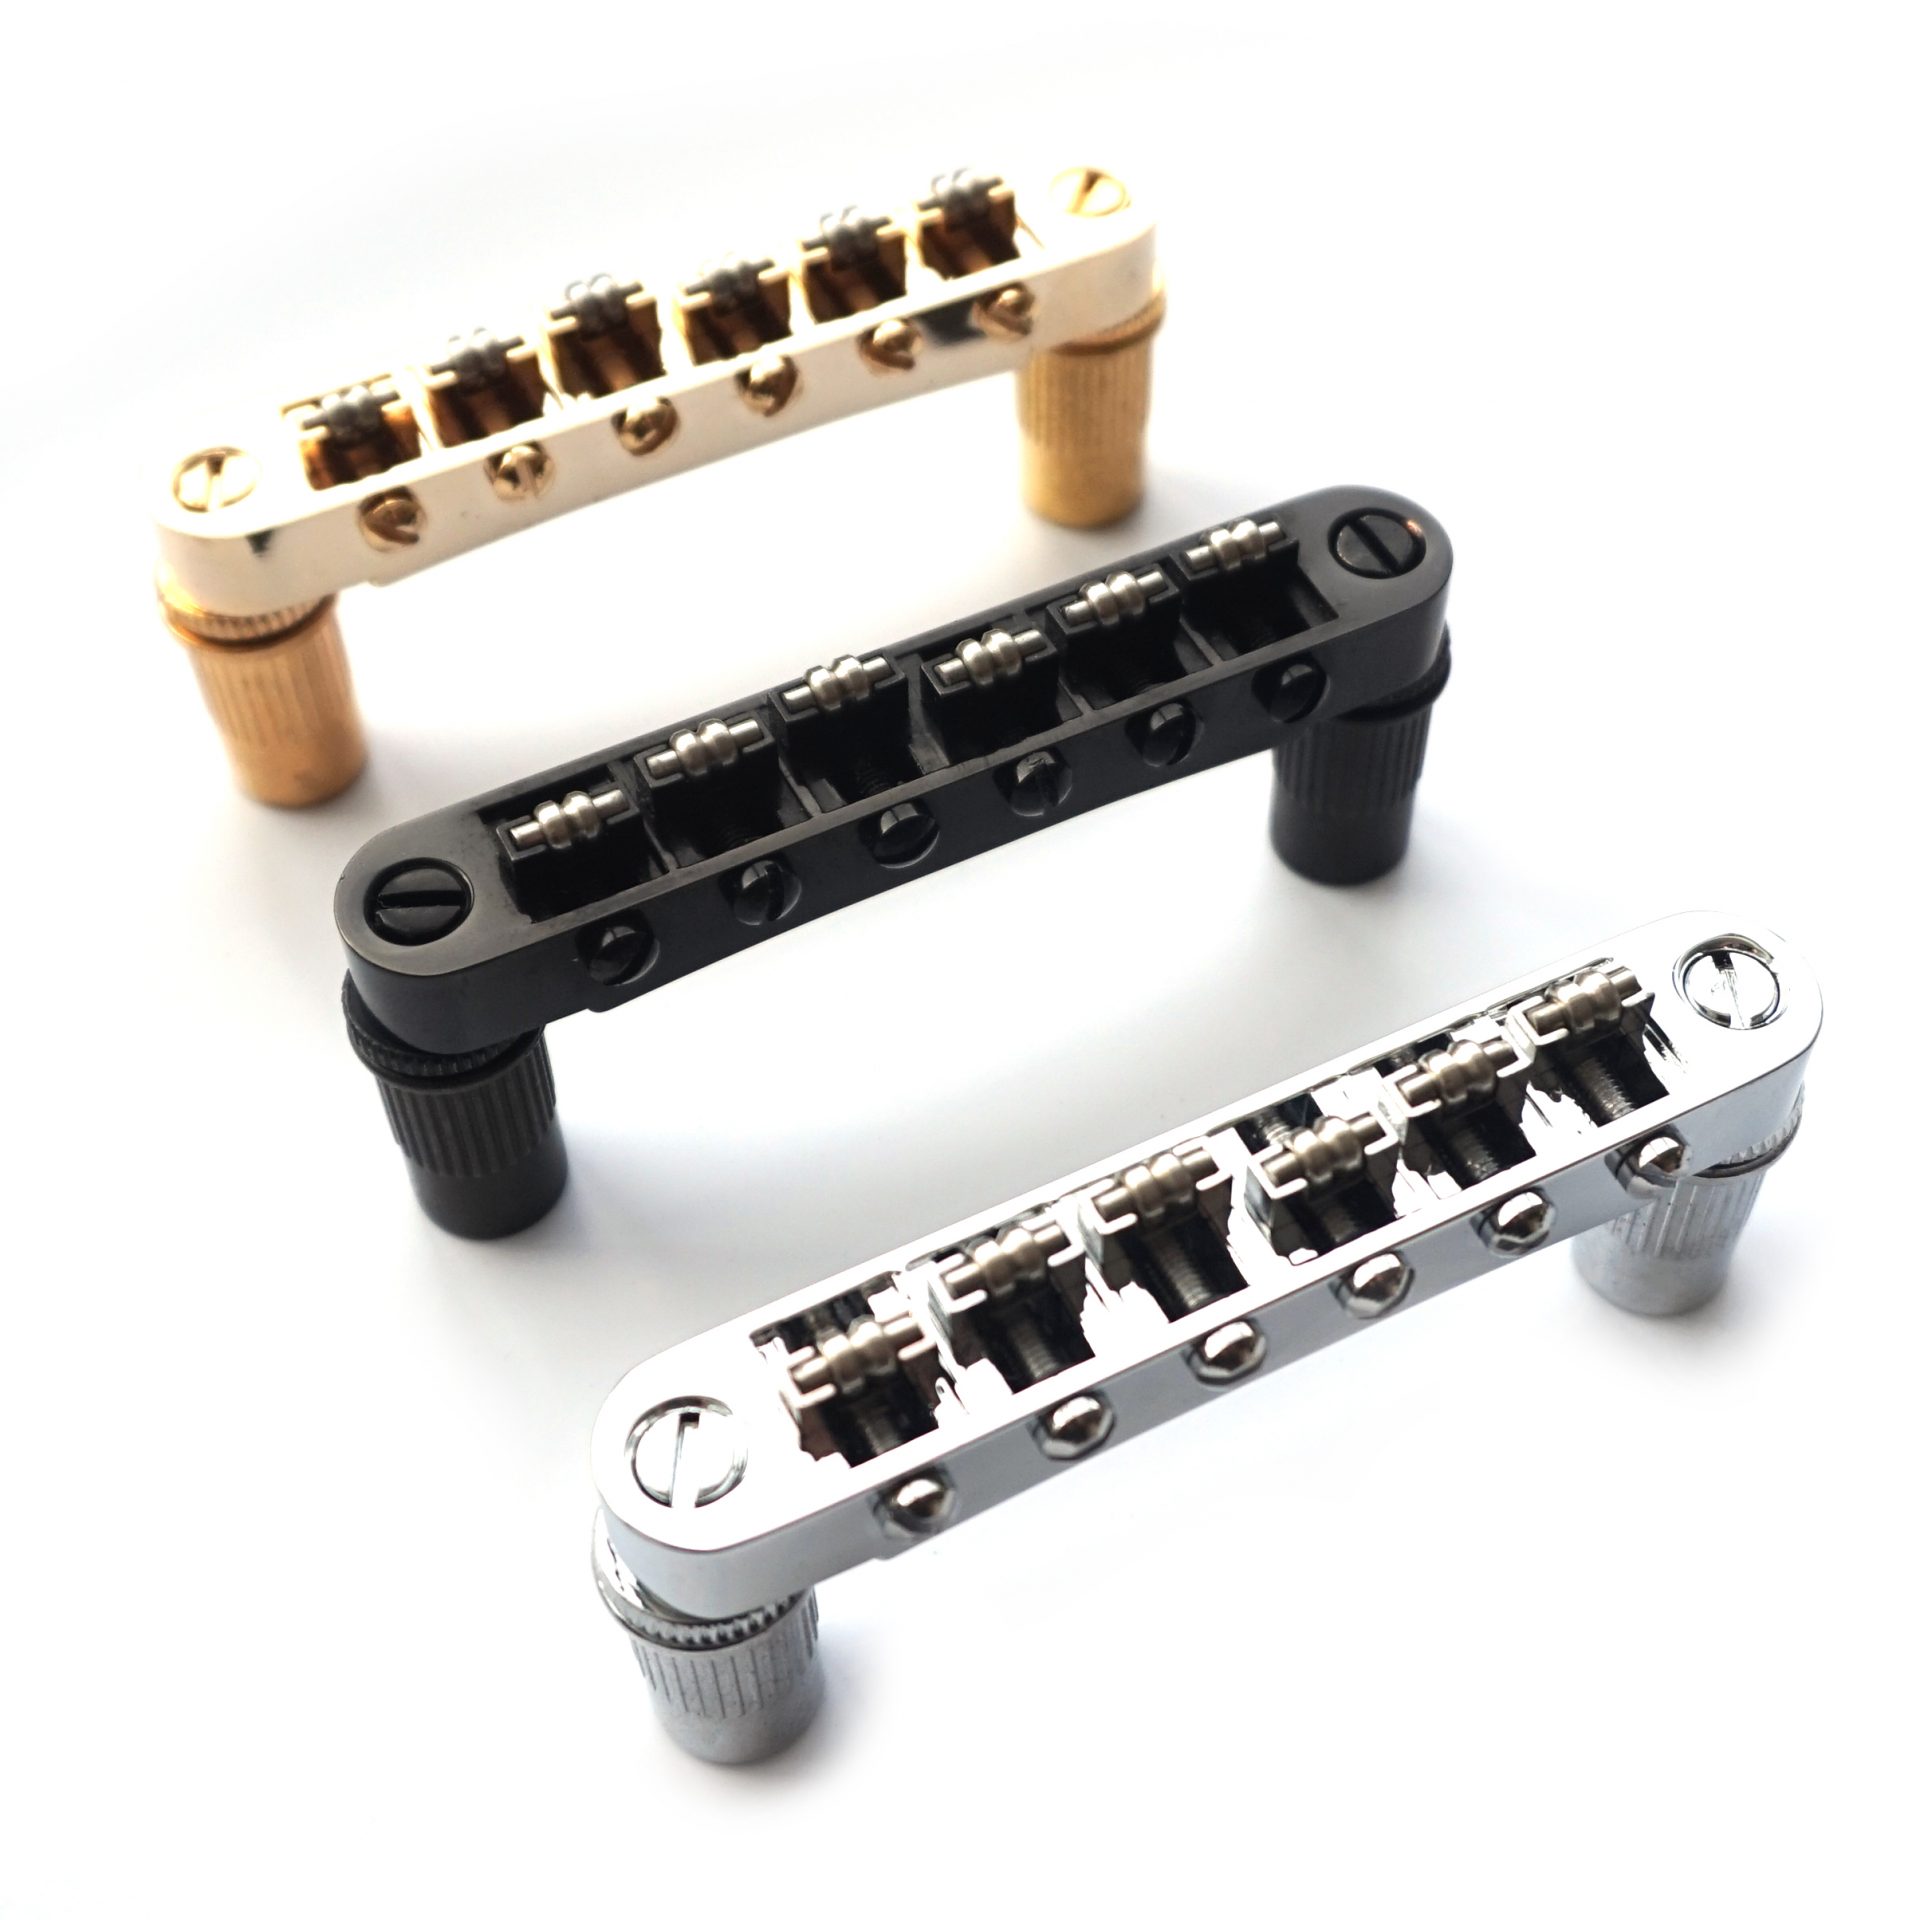 Chrome Guitar Roller Saddle Tune-O-Matic Bridge Fit For Les Paul SG Dot Bigsby Guitar M8 Threaded Posts